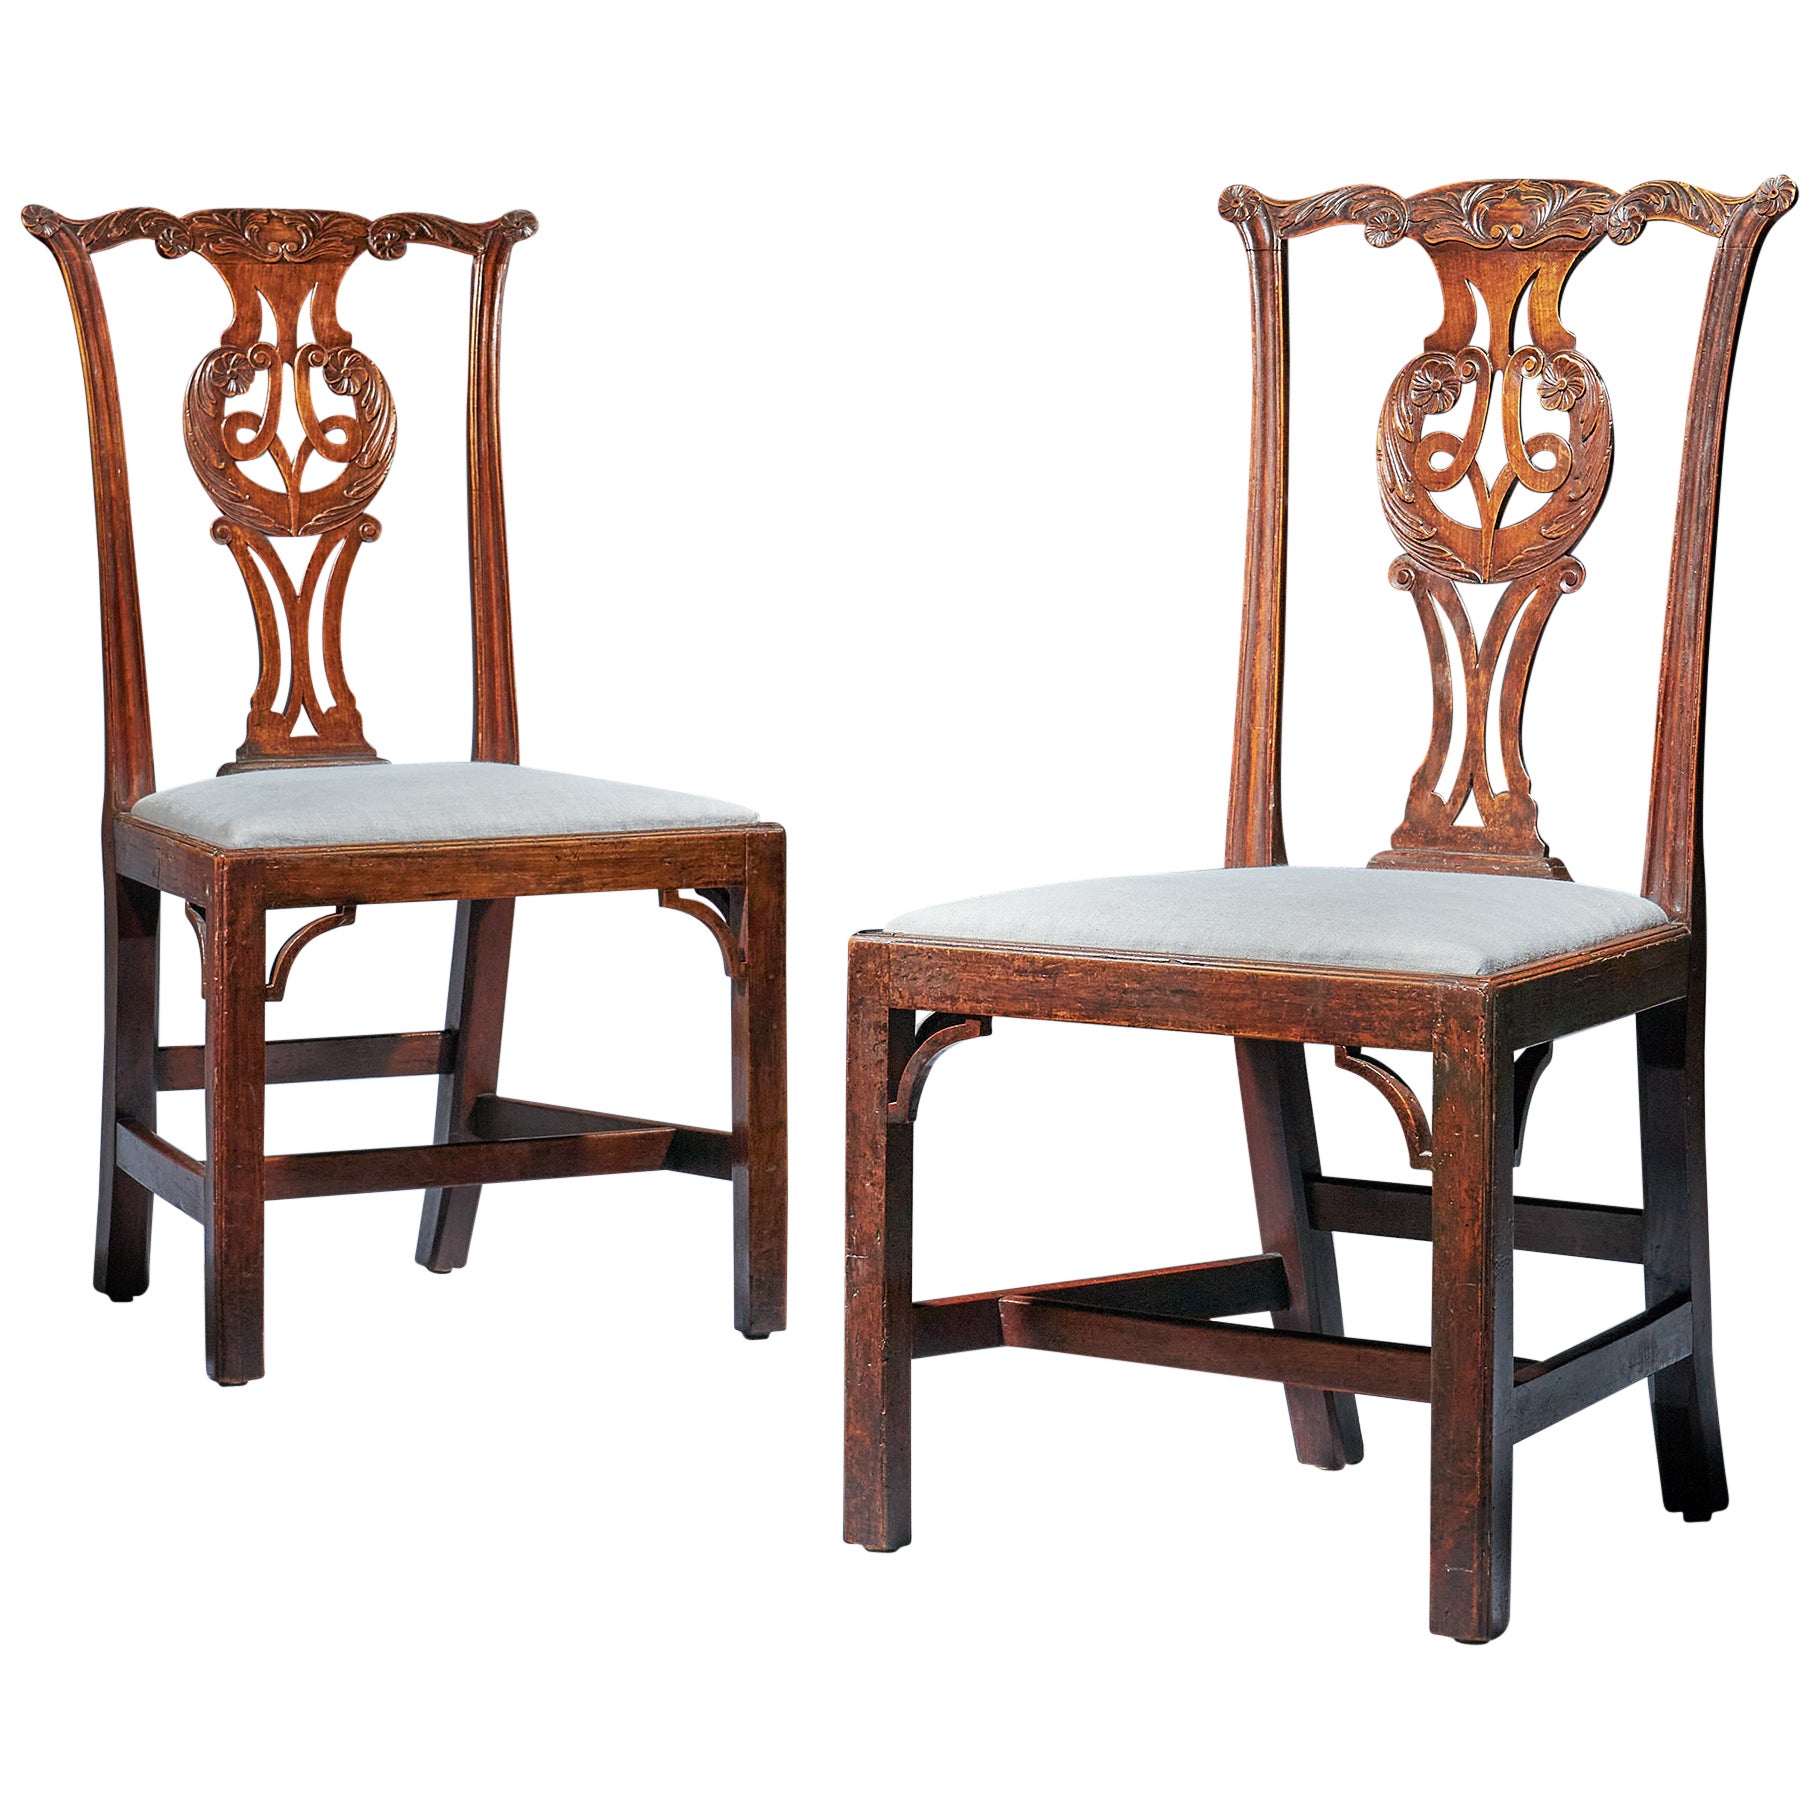 Unusual Pair of 18th Century George III Cherry Chairs, Chippendale Period 13